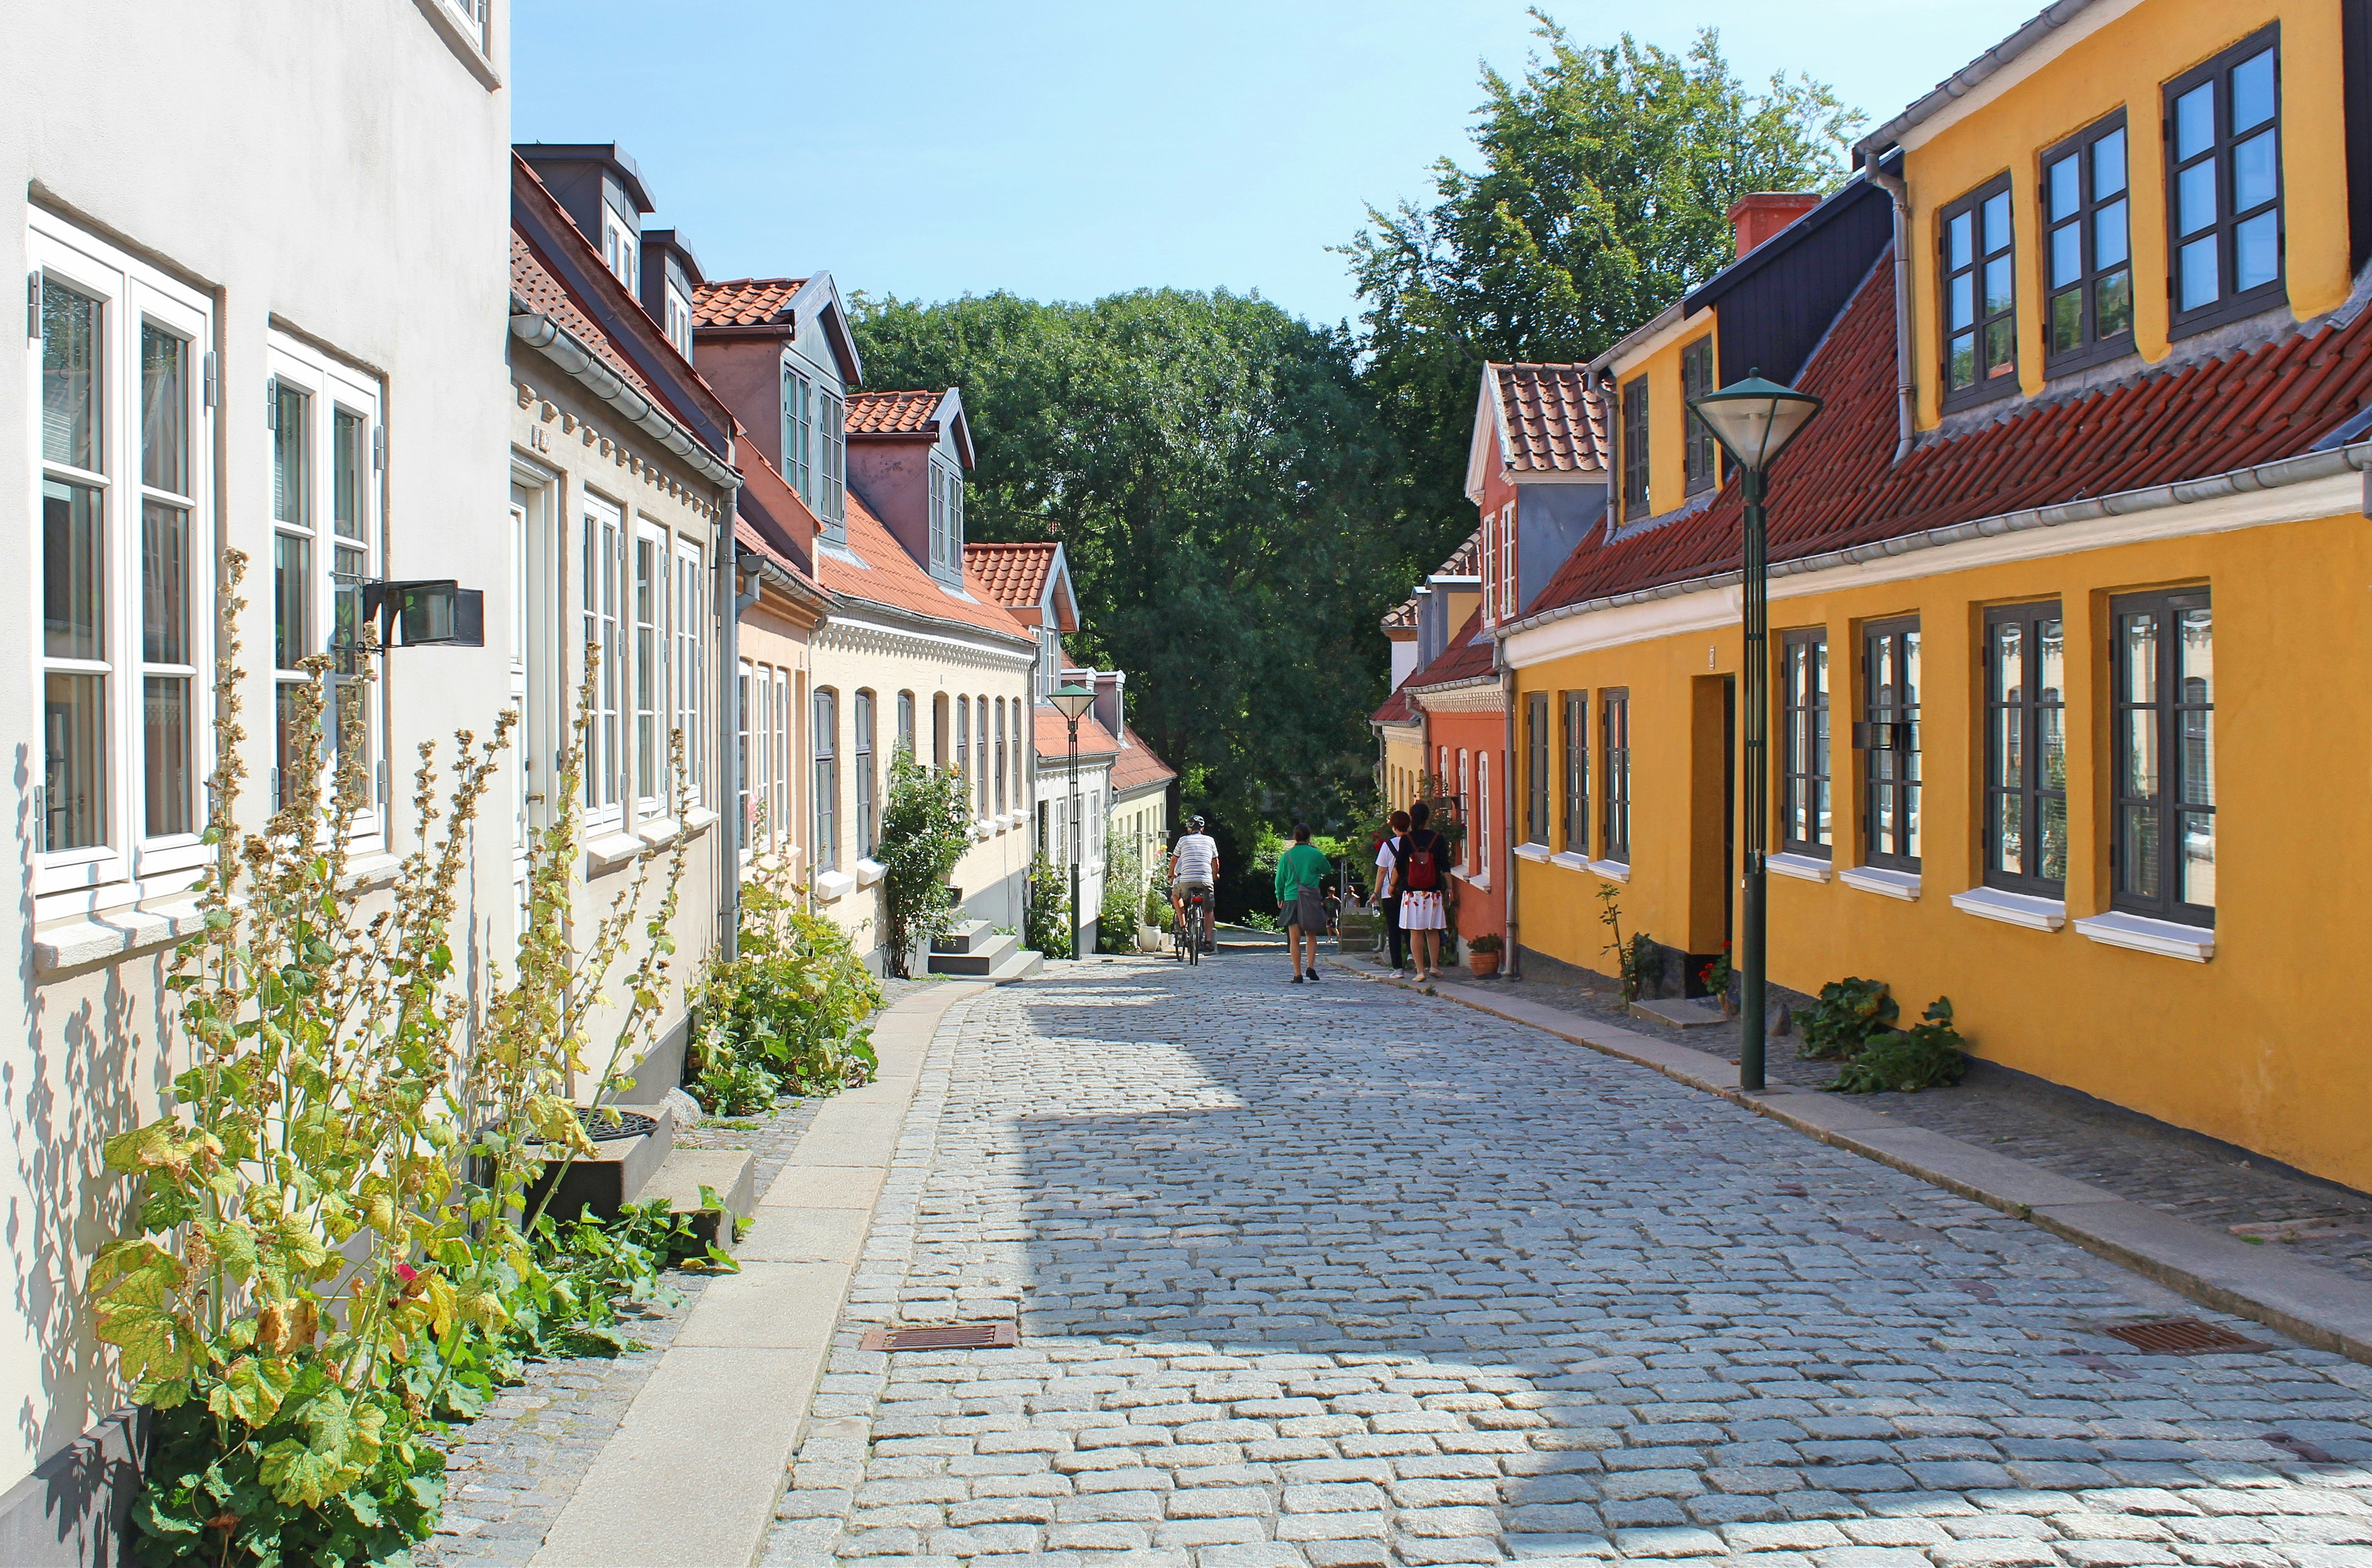 A view of Paaskestræde in Odense, Denmark, an idyllic, cobblestone street lined with colourful houses.